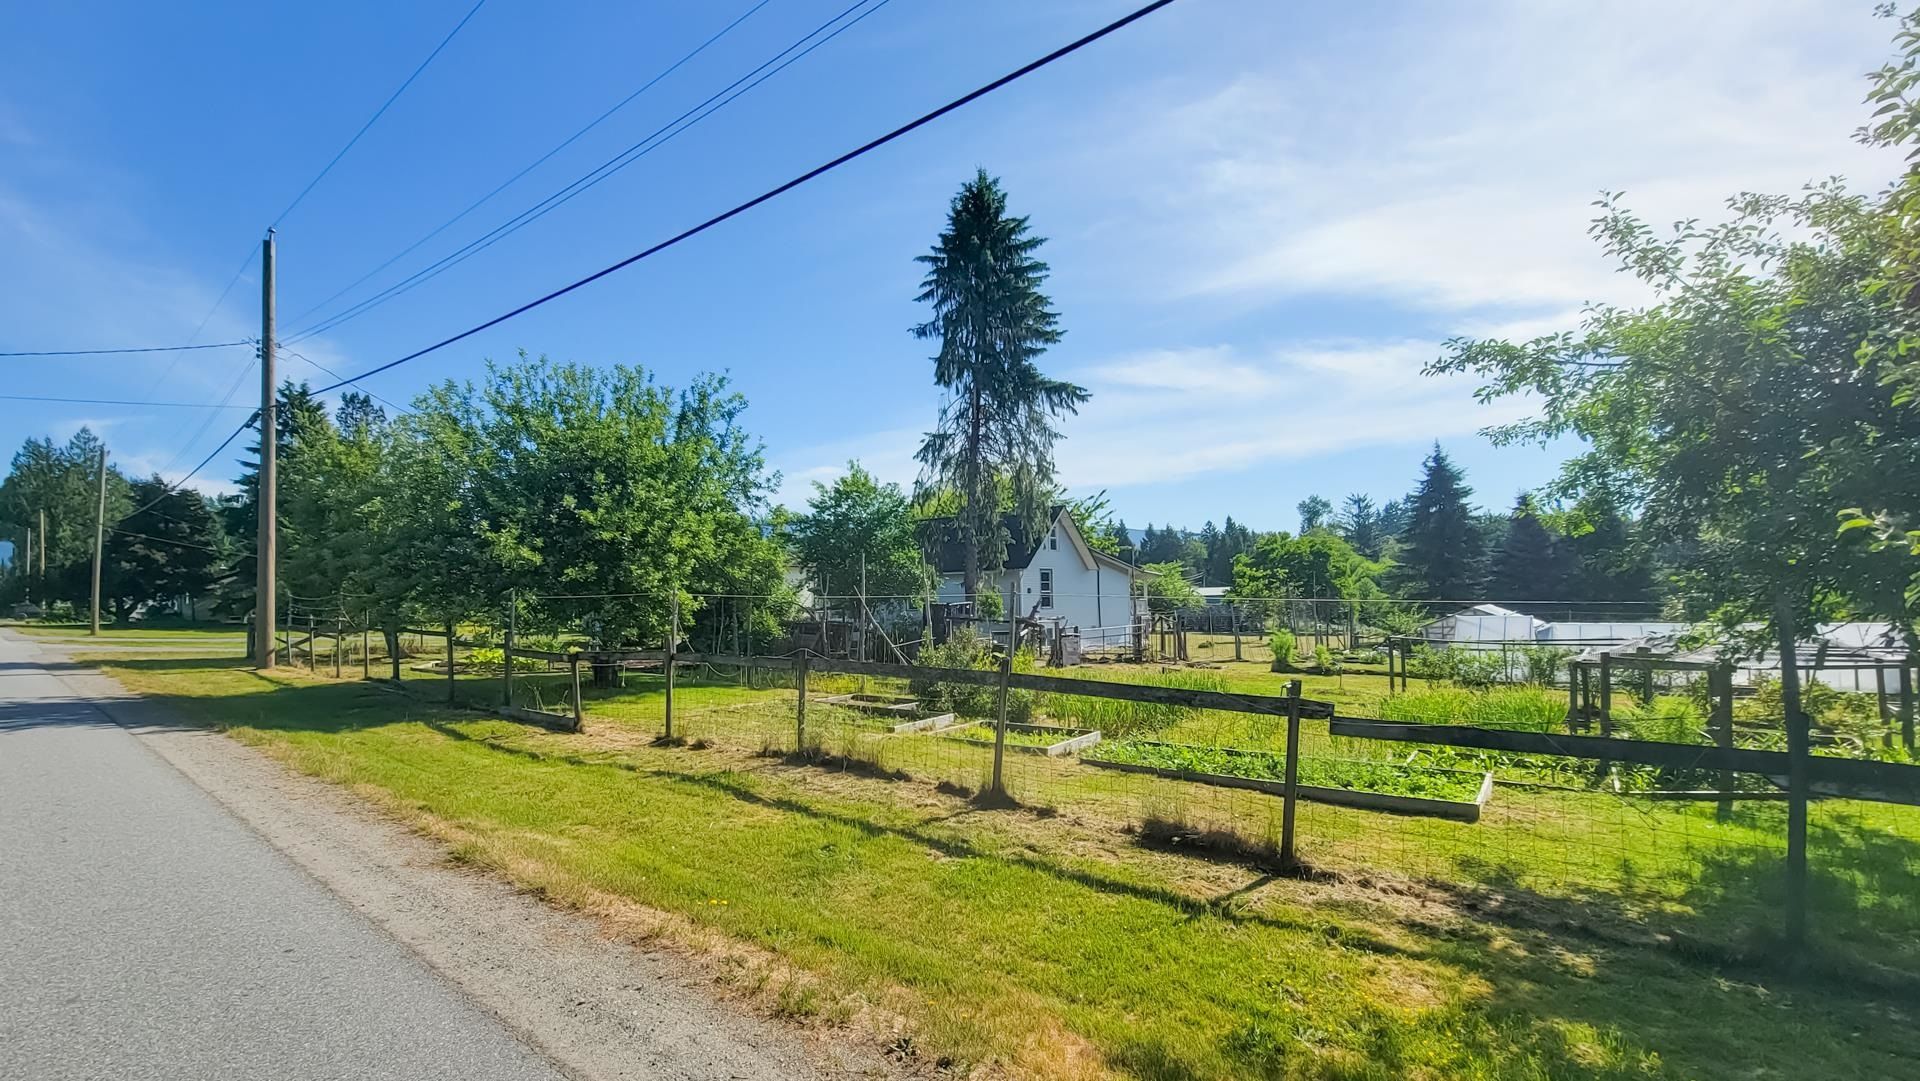 New property listed in Websters Corners, Maple Ridge